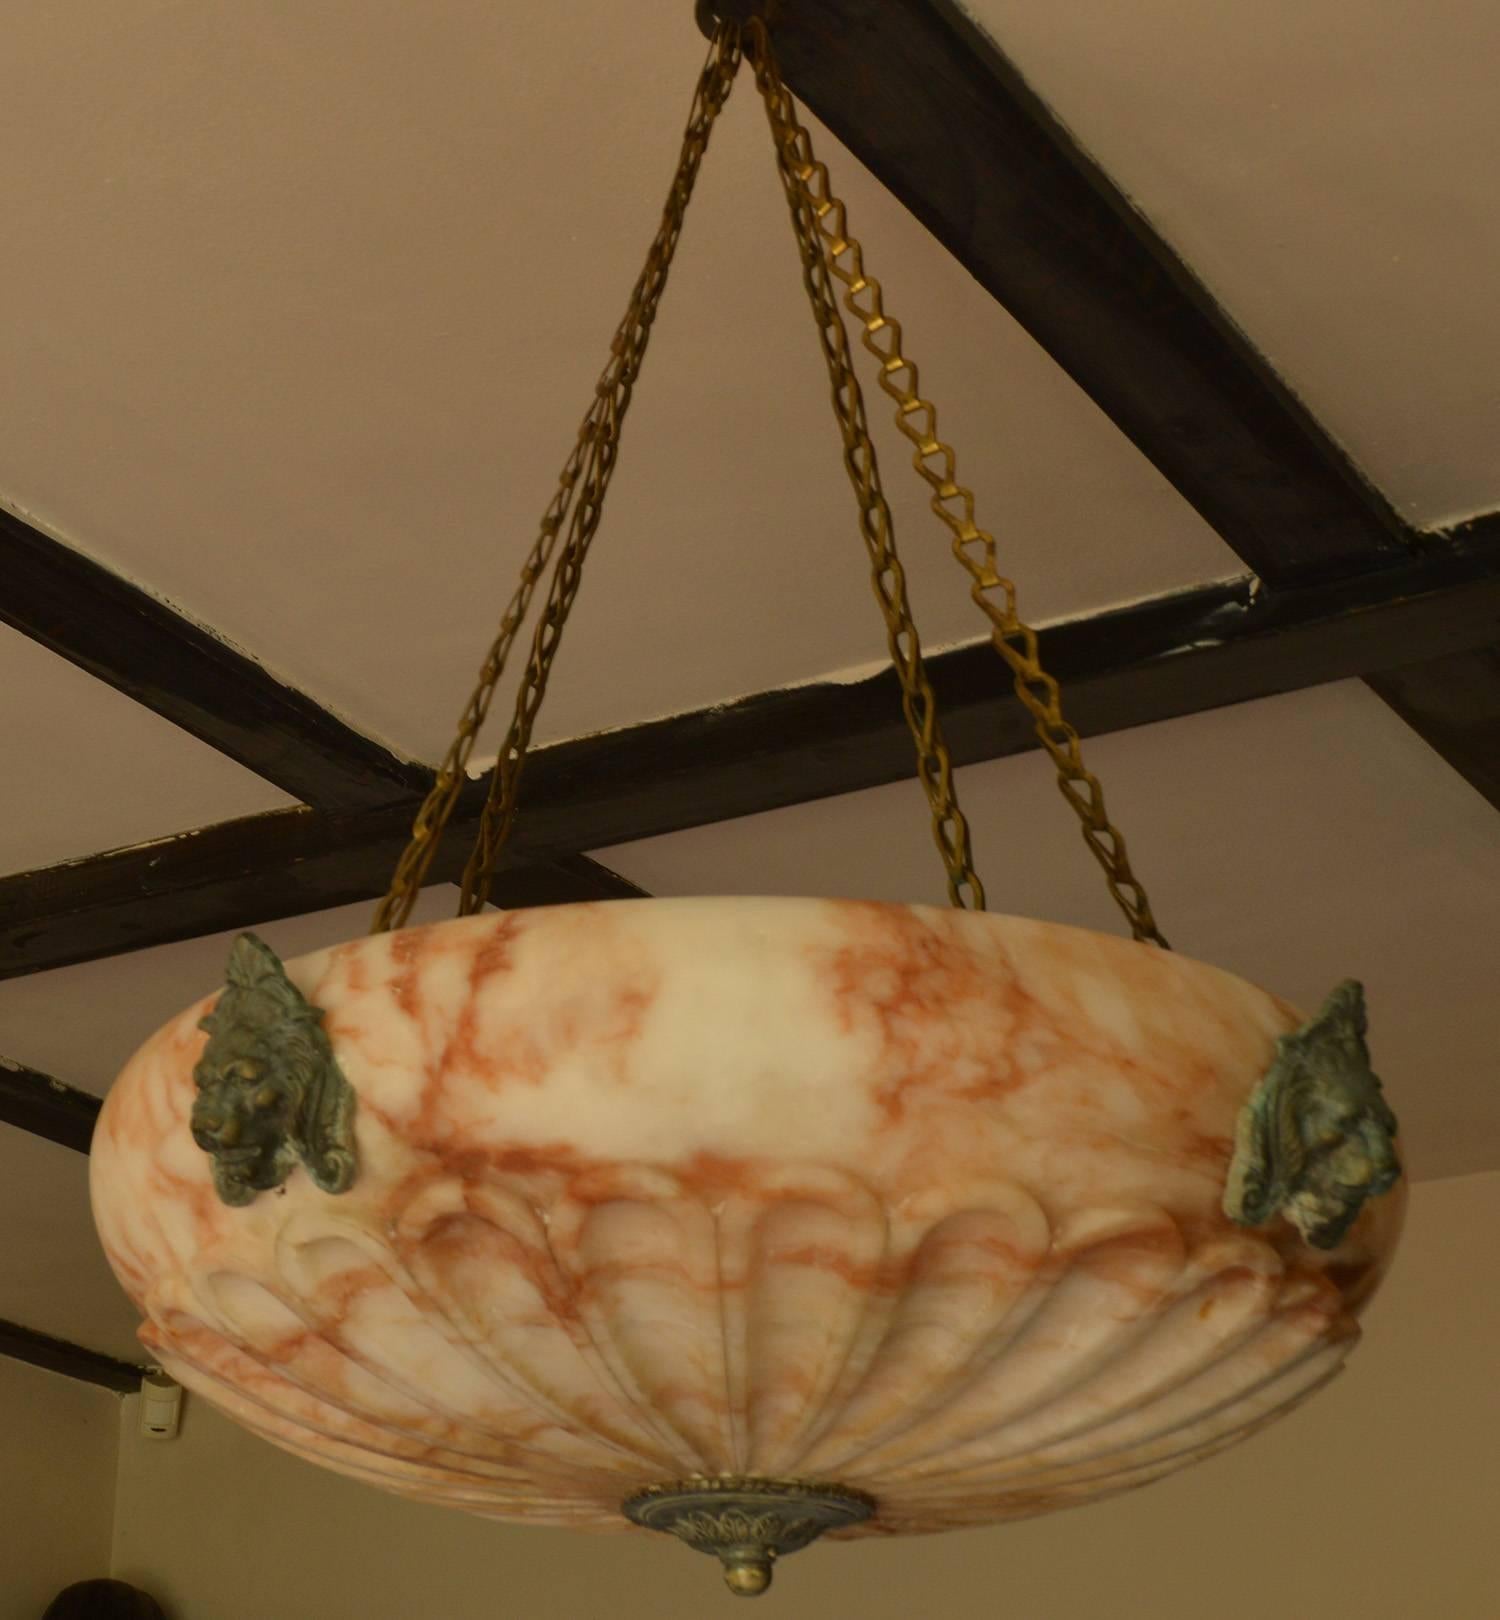 Fabulous carved alabaster chandelier.

Wonderful gadrooning and grain in the alabaster.

I particularly like the original gilt brass lion mask hardware.

The measurements given below relate to the alabaster part. These particular chains